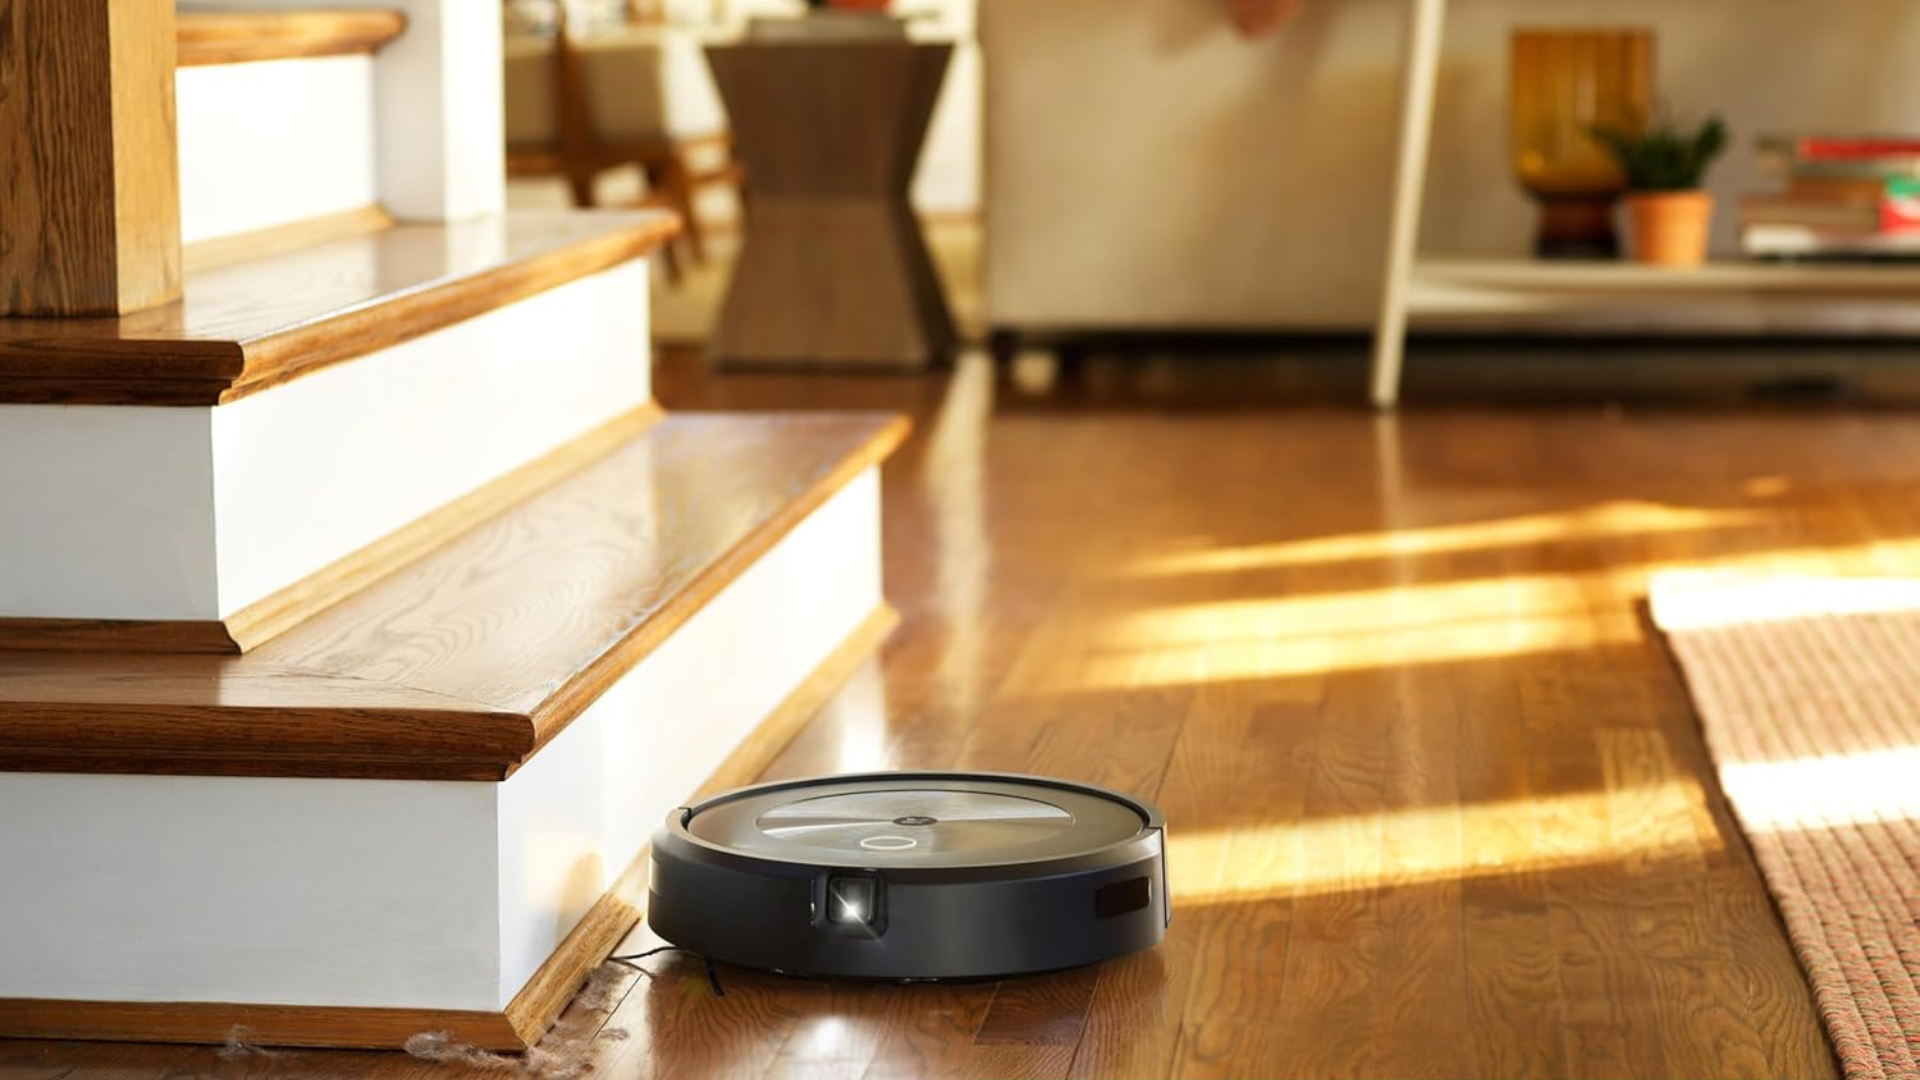 From Roomba to Shark, here are the best robot vacuum deals you can shop the week of August 5